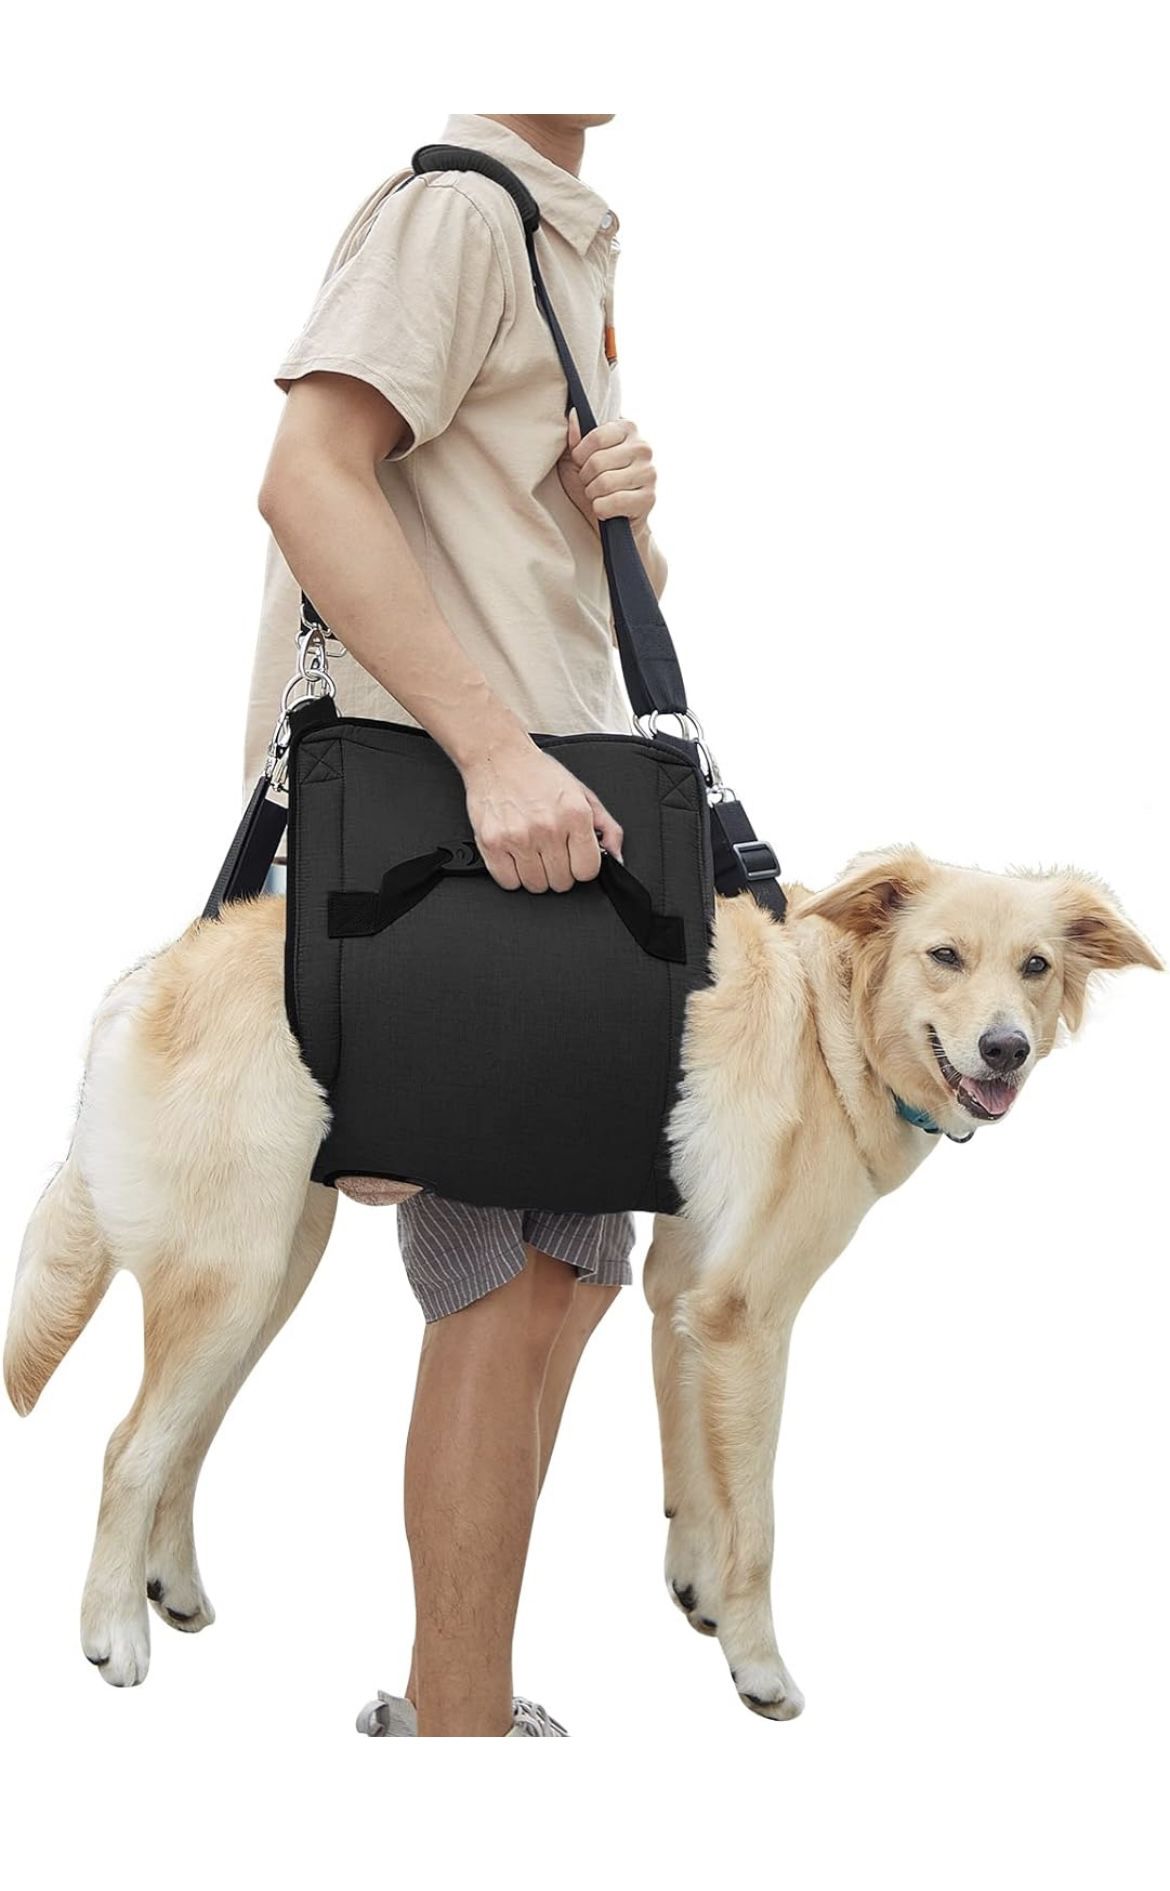 Codeo Dog Carry Sling, Emergency Backpack Pet Legs Support & Rehabilitation Dog Lift Harness for Nail Trimming, Dog Carrier for Senior Dogs Join ✅NEW✅